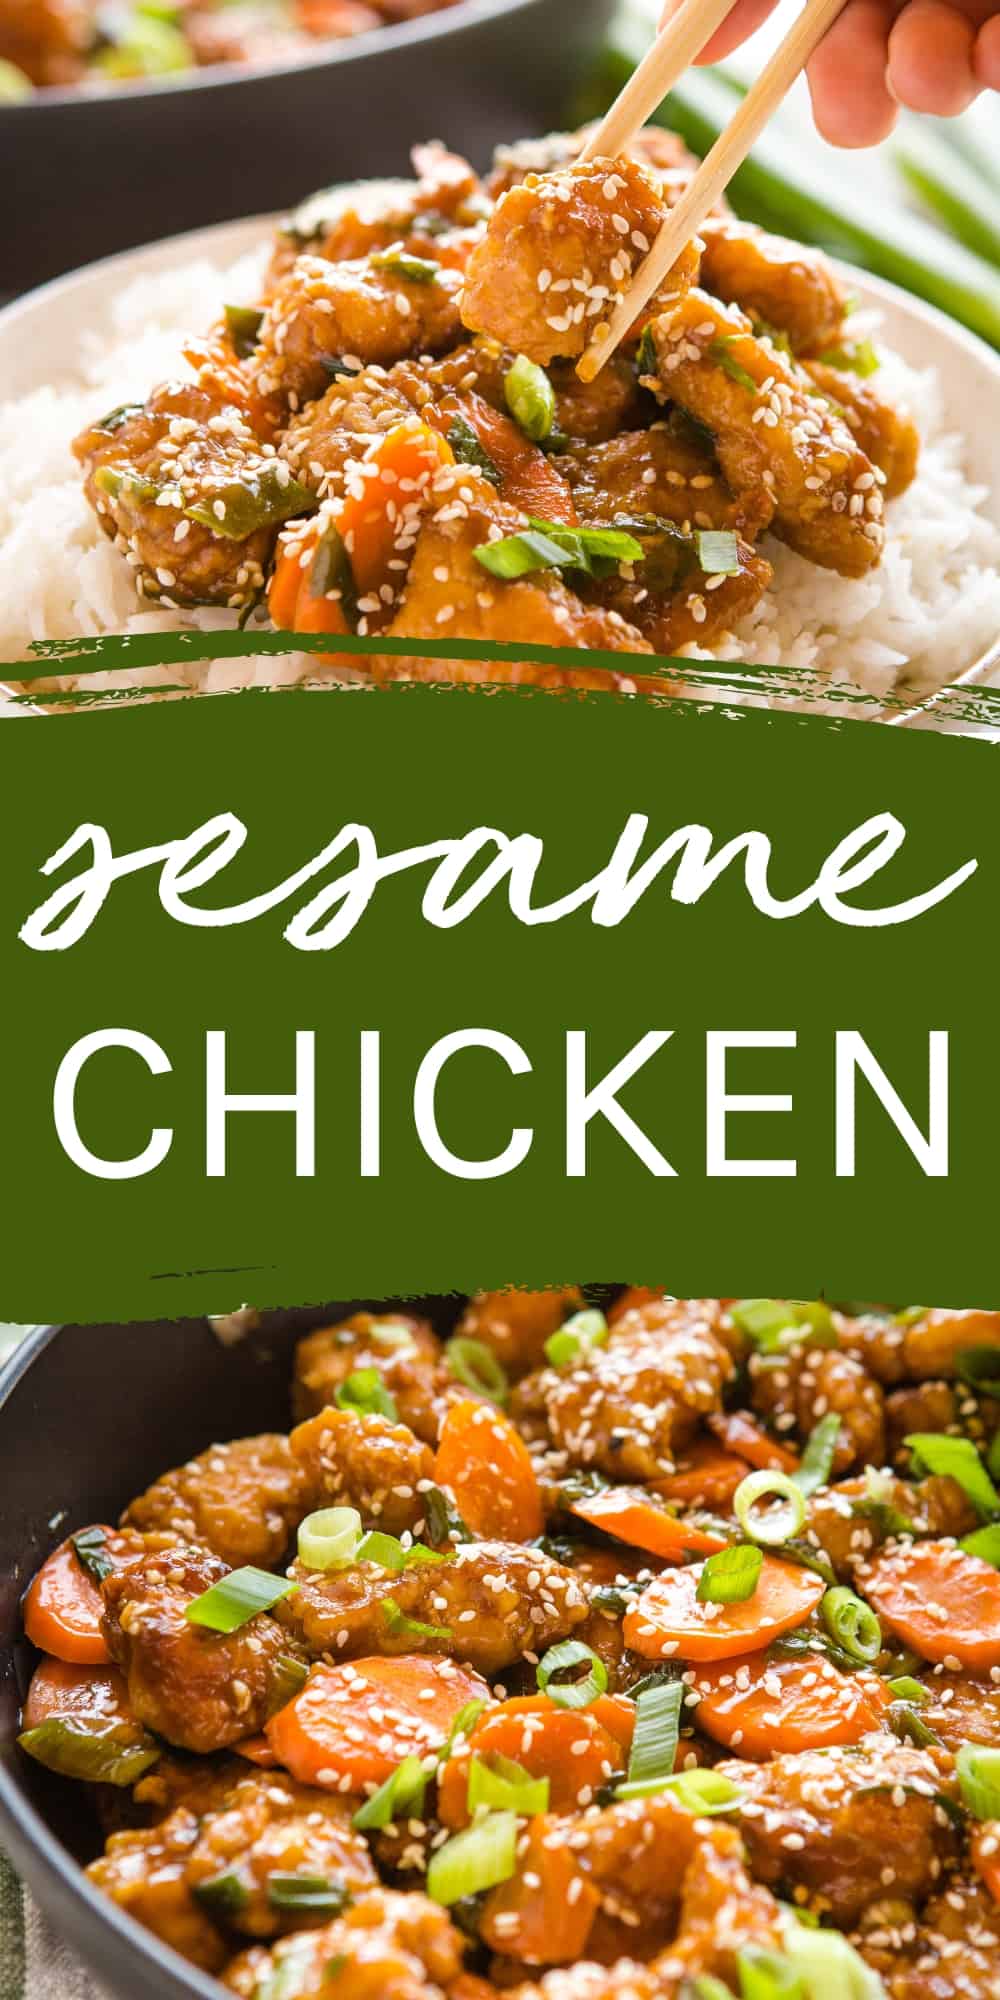 This Sesame Chicken Recipe is better than take-out! Simple crispy chicken & stir fry veggies in a sweet and savoury sauce! Ready in 30 minutes! Recipe from thebusybaker.ca! #sesamechicken #easysesamechicken #takeoutrecipe #easyweeknightmeal #asianstyle #stirfry via @busybakerblog